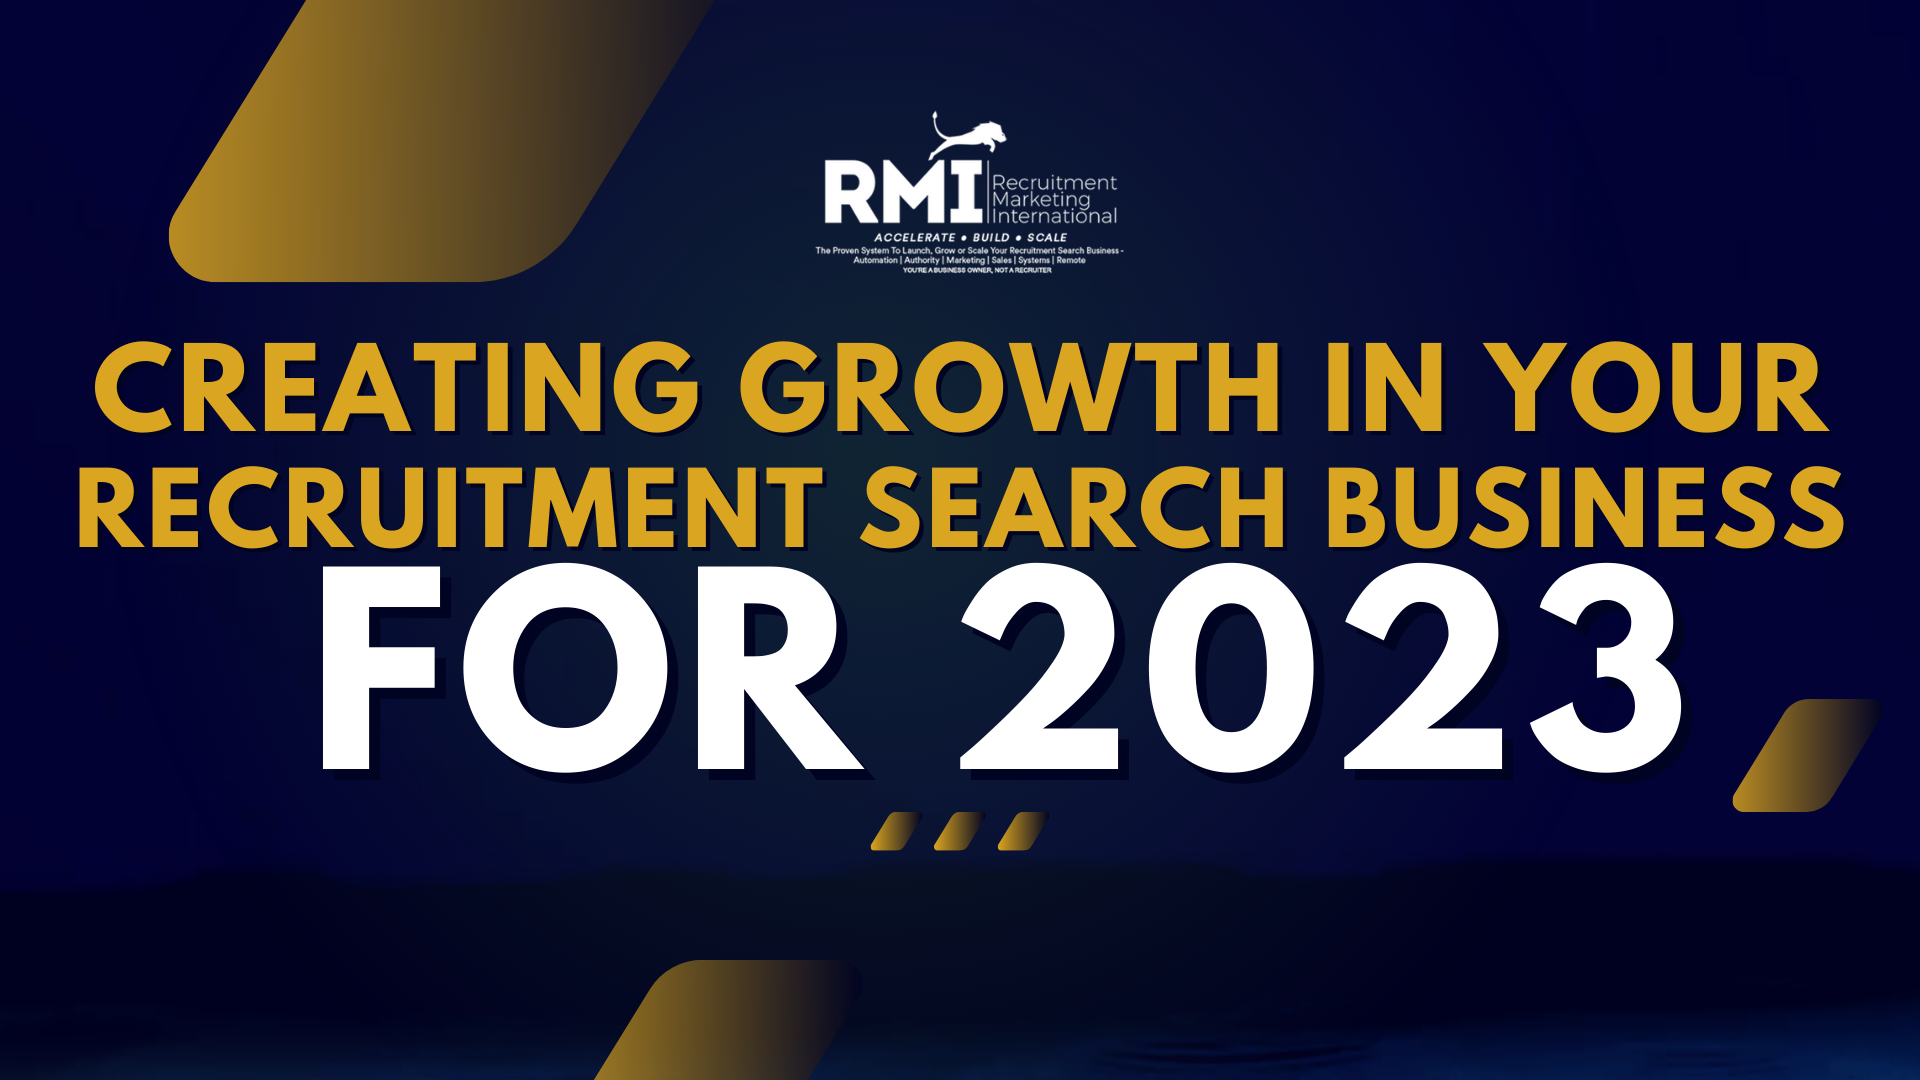 PODCAST 228 – CREATING GROWTH IN YOUR RECRUITMENT/SEARCH BUSINESS FOR 2023: STRUCTURE YOUR BUSINESS FOR SUCCESS